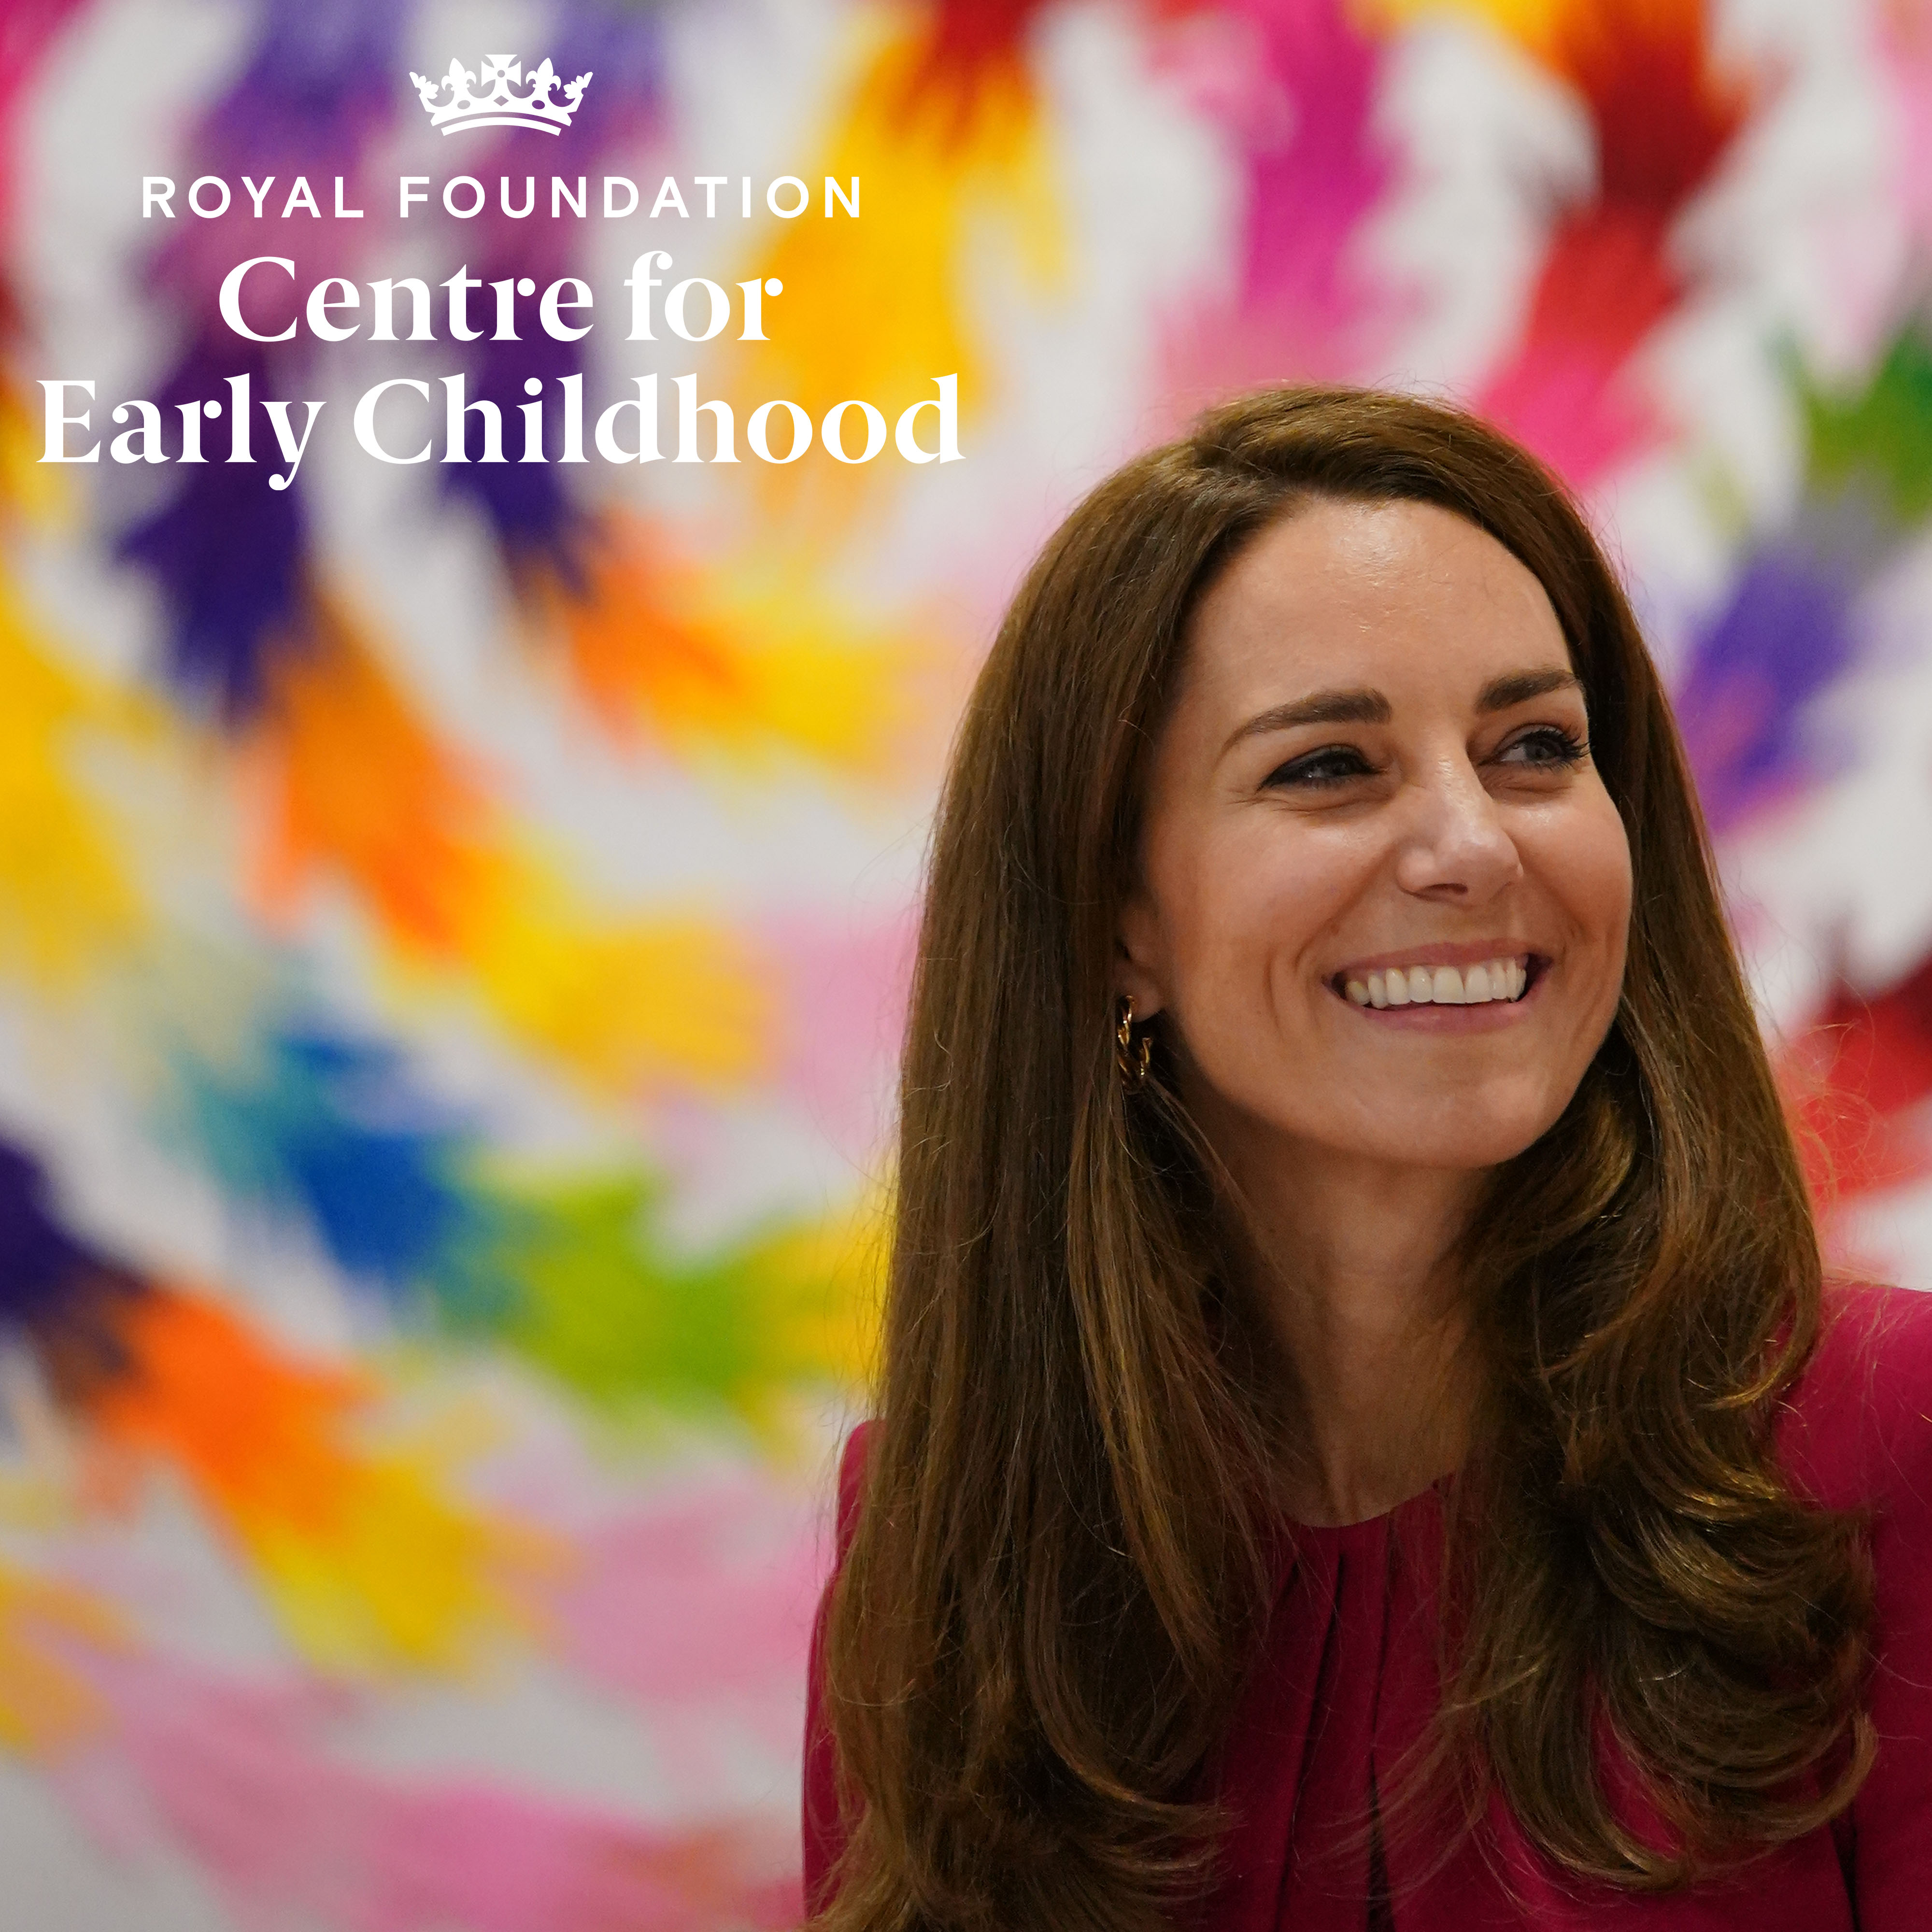 Launch of The Royal Foundation's Centre for Early Childhood